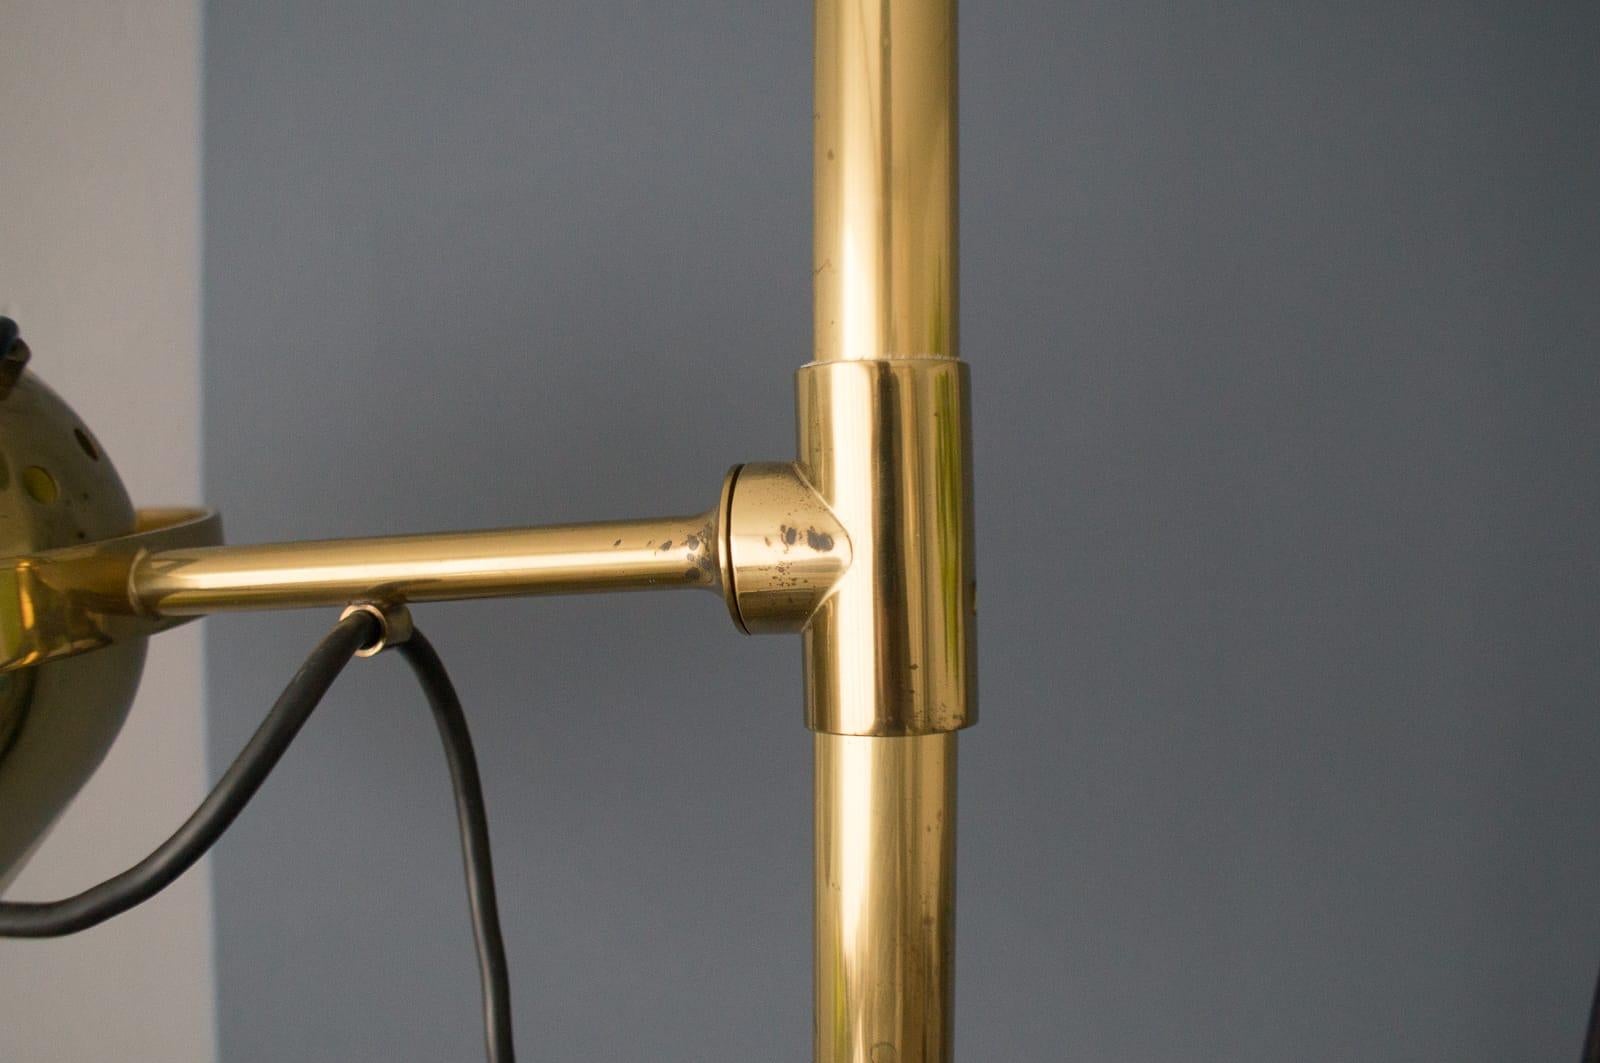 Extremly Rare Brass Tension Lamp from Florian Schulz, Model S 100 5